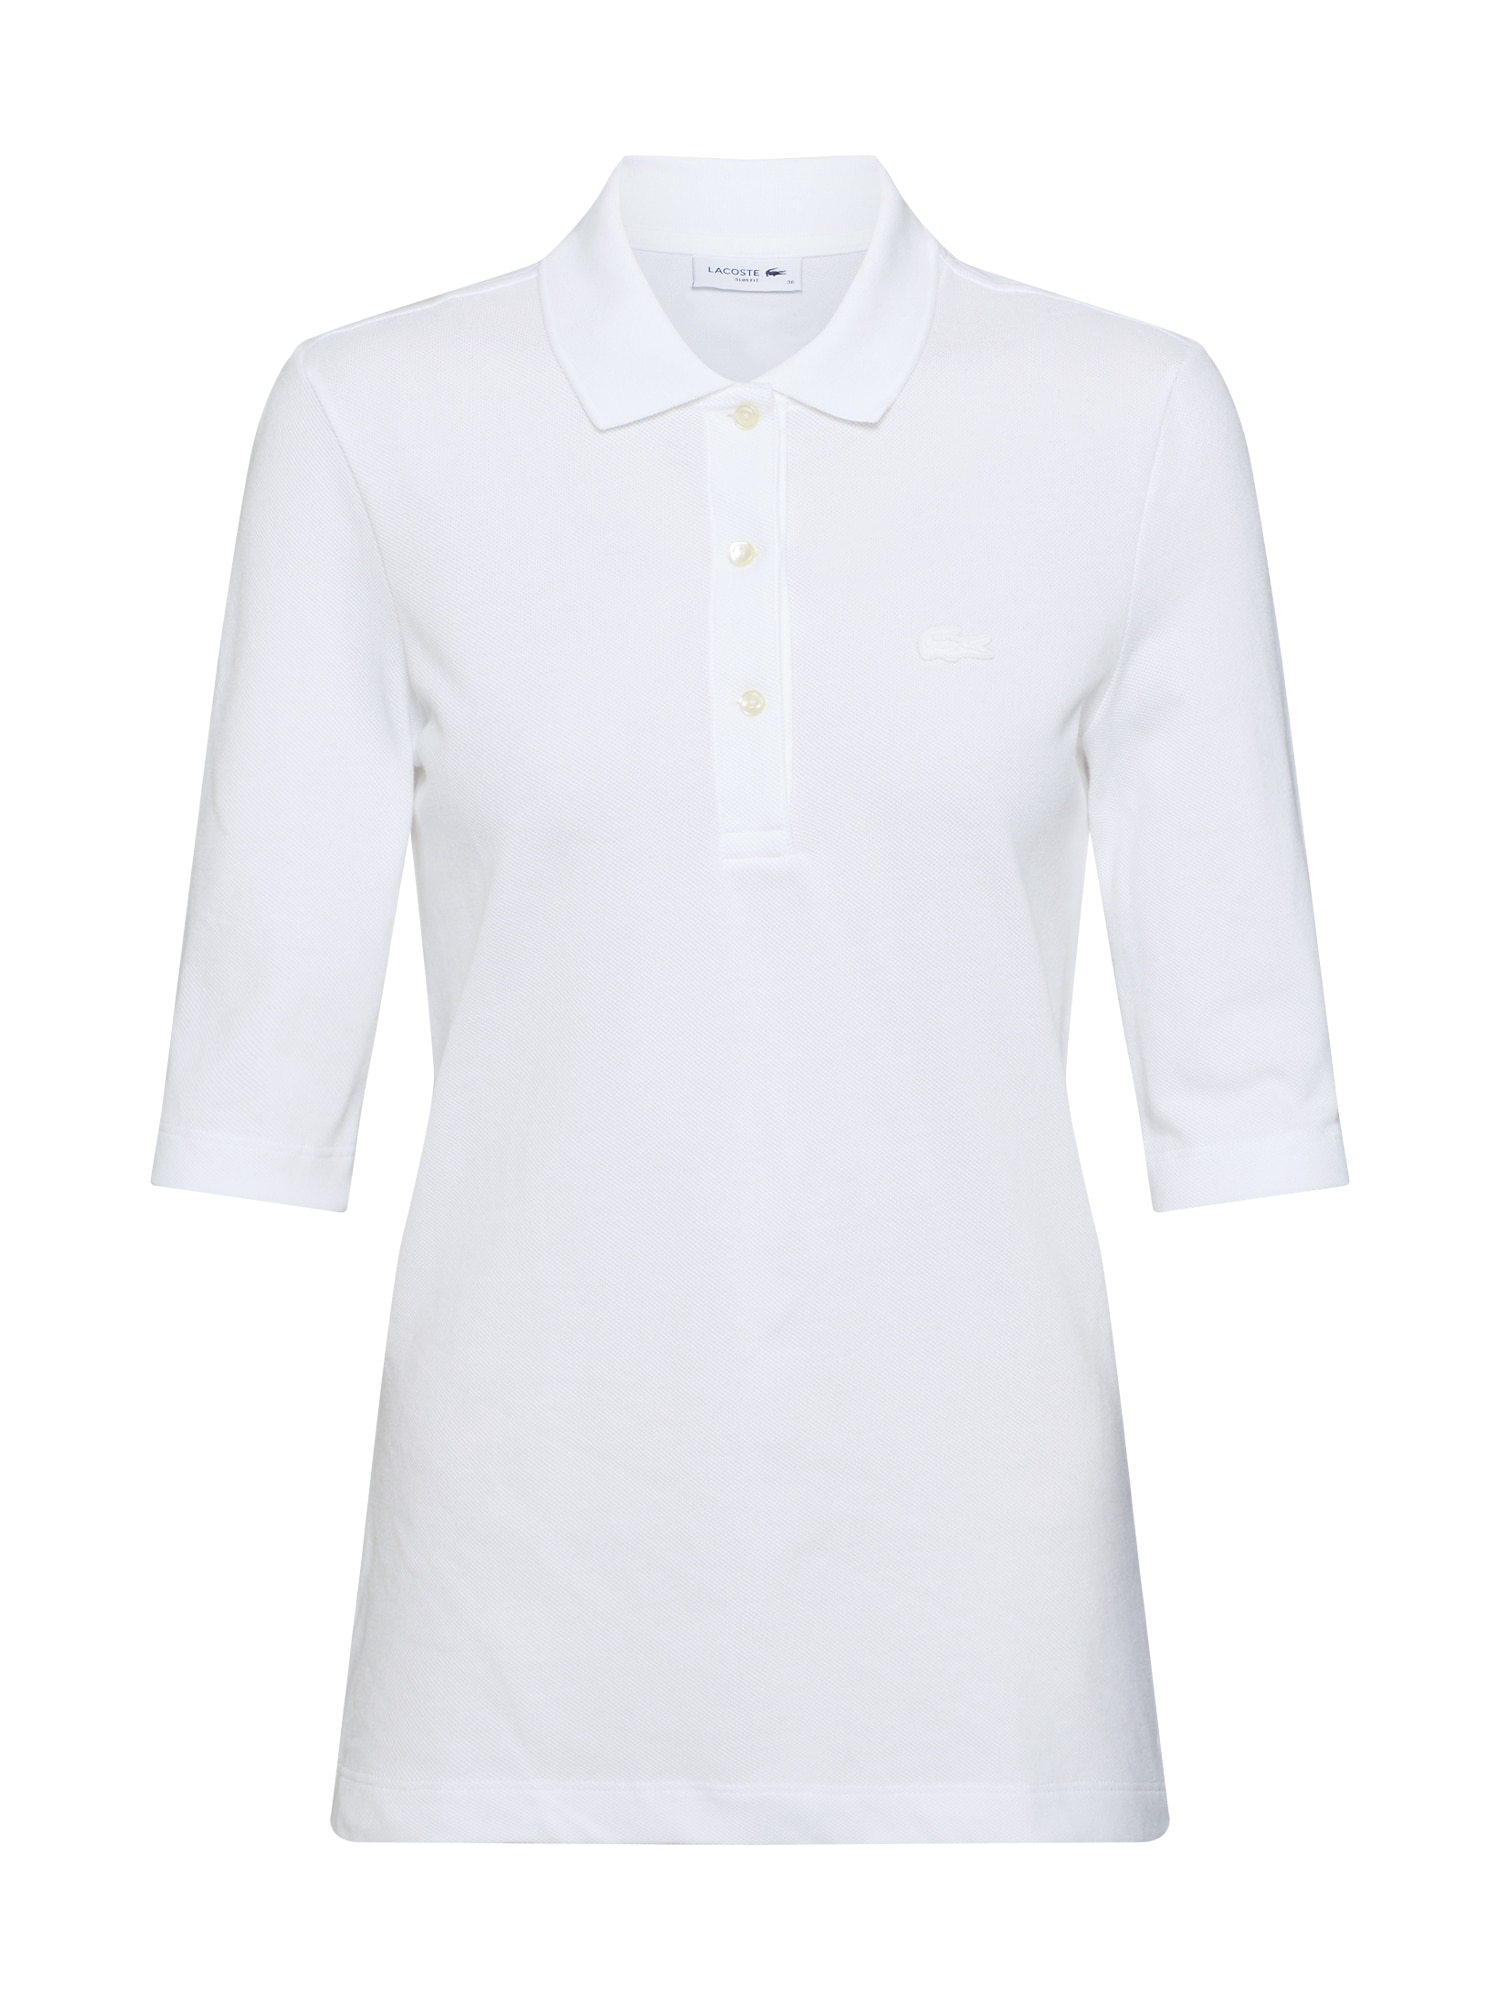 Lacoste LACOSTE Poloshirt 'CHEMISE COL BORD-COTES MA' weiß